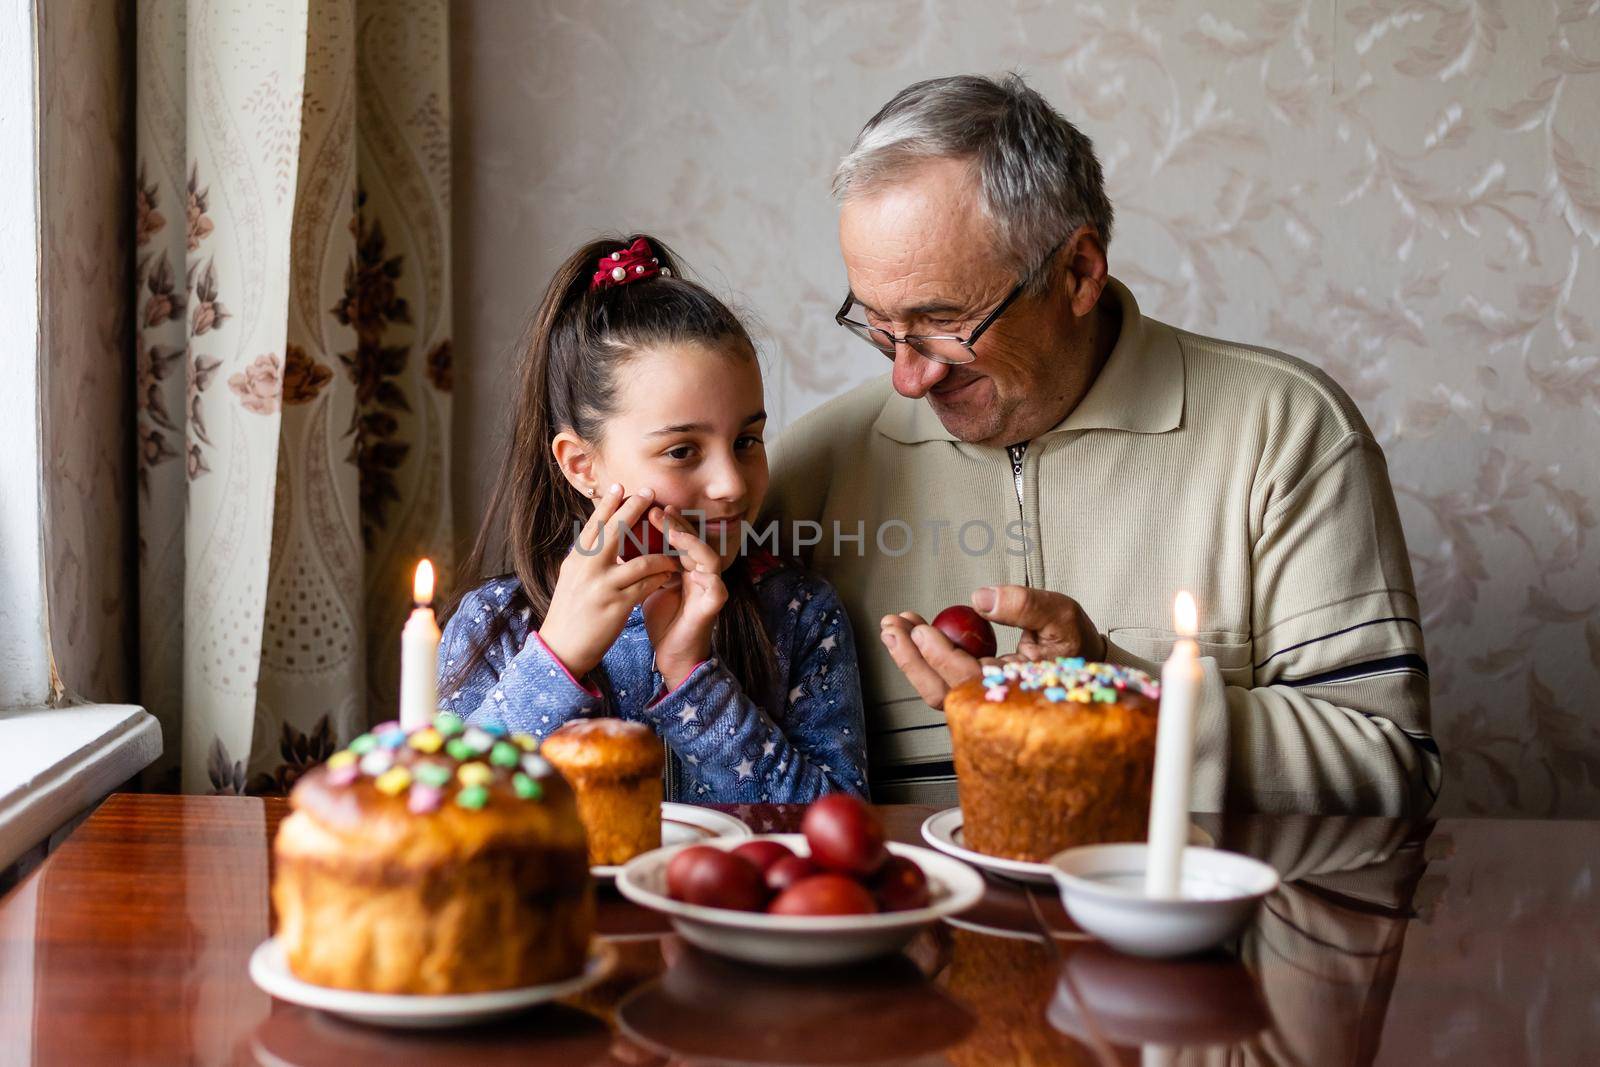 grandfather and granddaughter at a festive table to celebrate Easter.